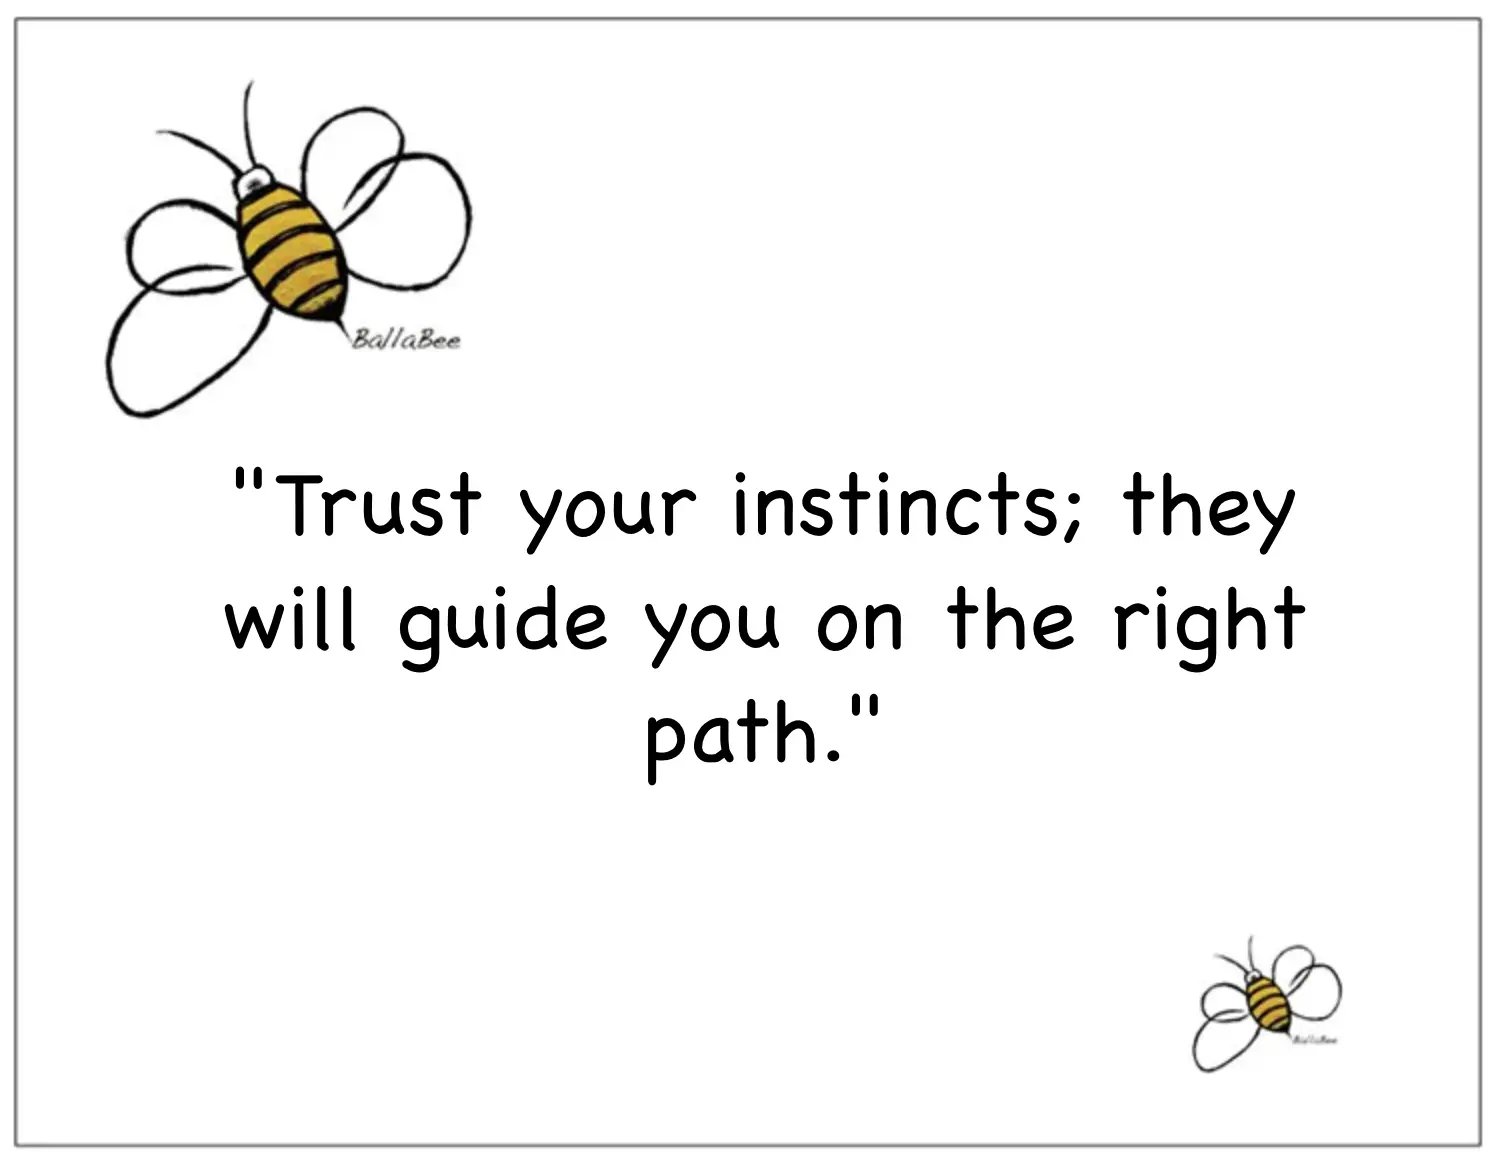 Trust your instincts; they will guide you on the right path